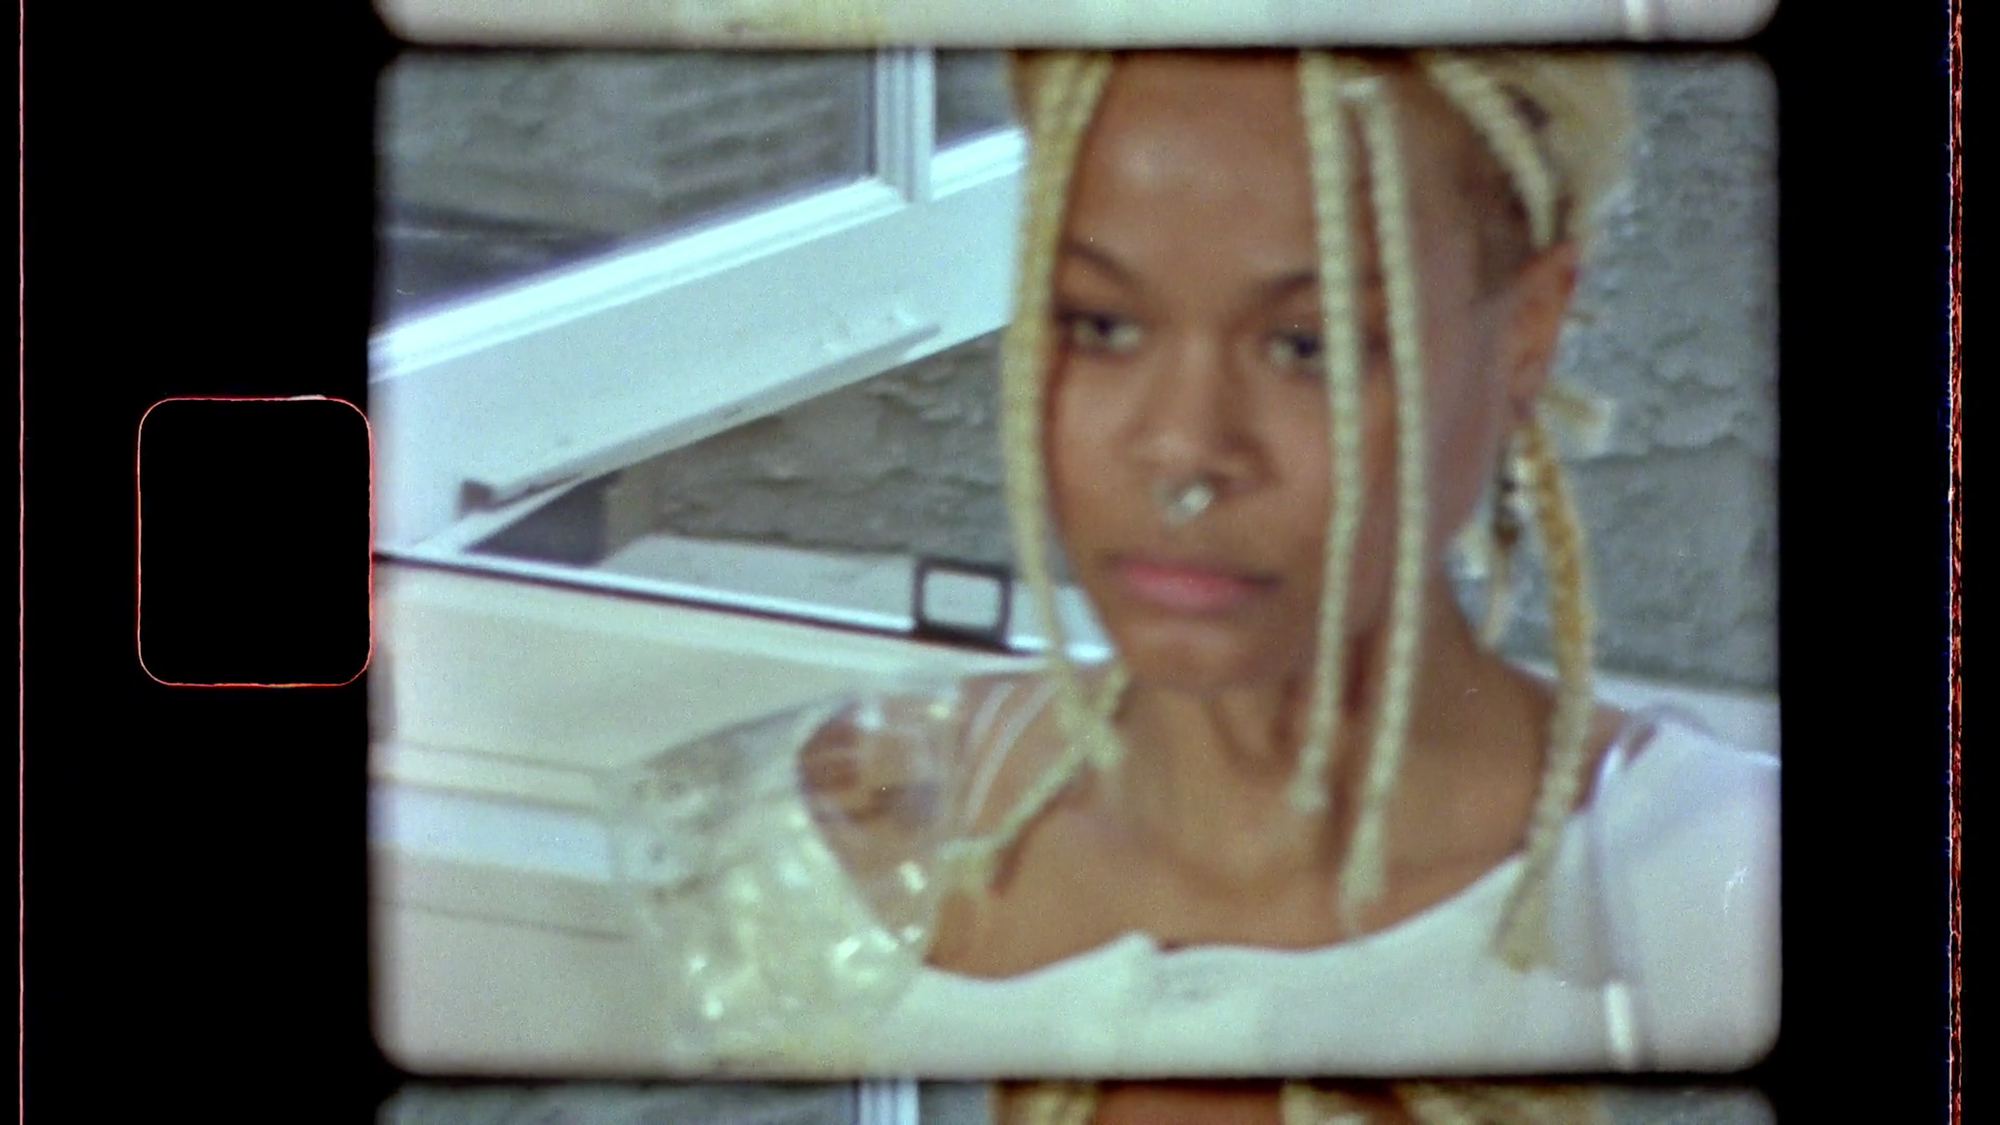 8mm frame film still of a person with blonde dreadlocks in white dress in front of a window